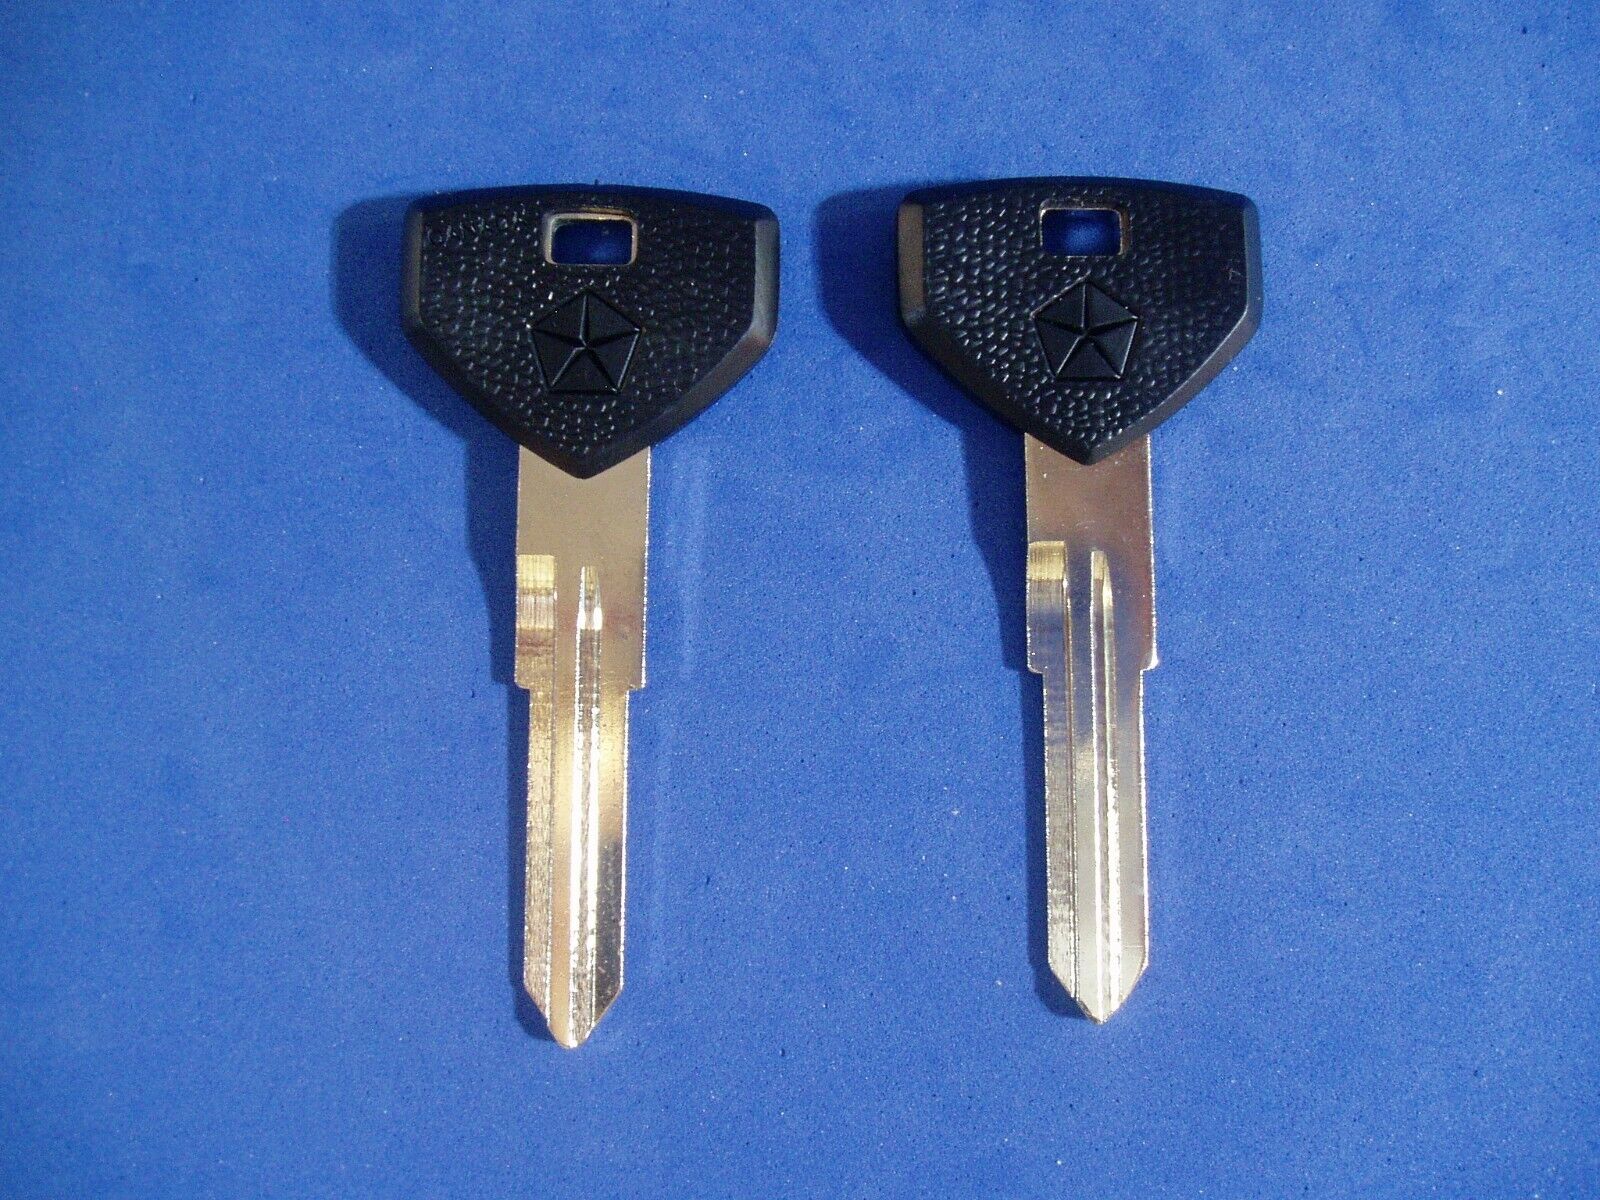 LOT OF TWO GENUINE CLASSIC CHRYSLER RUBBER HEADED KEY BLANK DODGE EAGLE